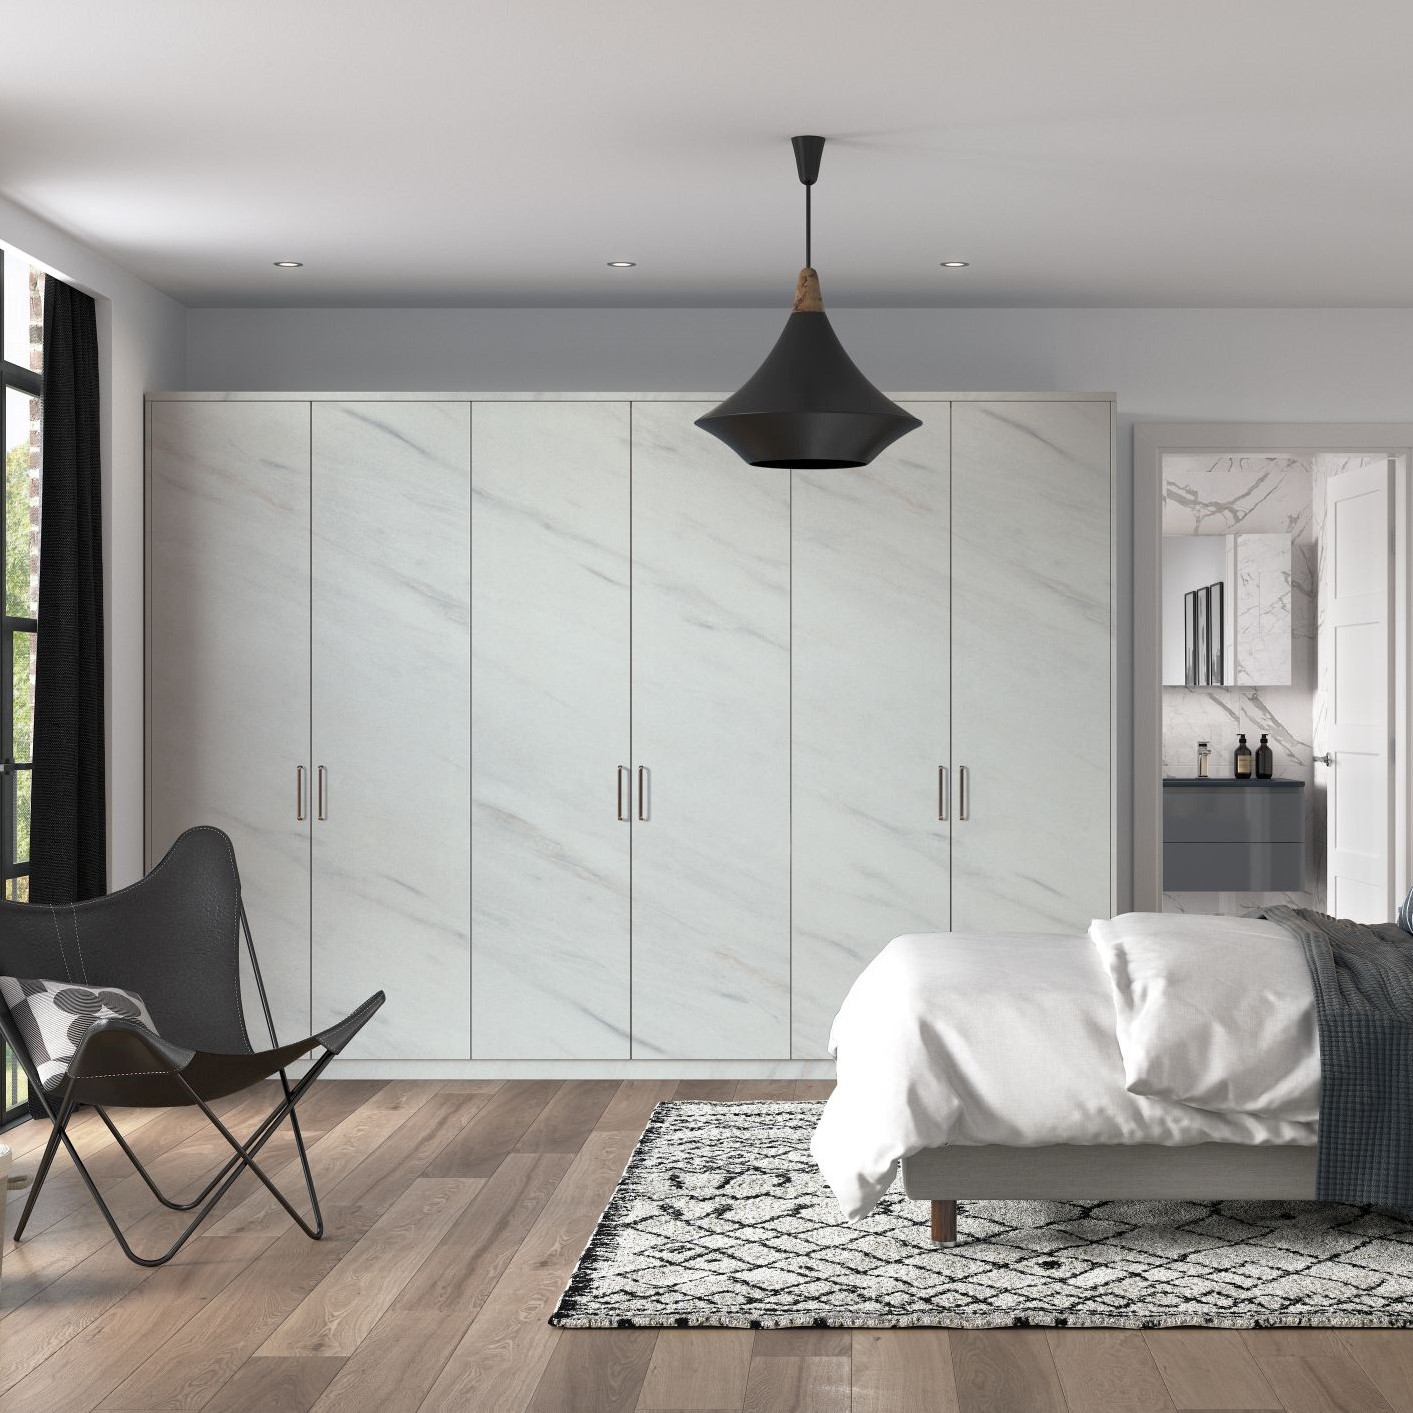 Ethos Edged Wardrobes by O&S Doors